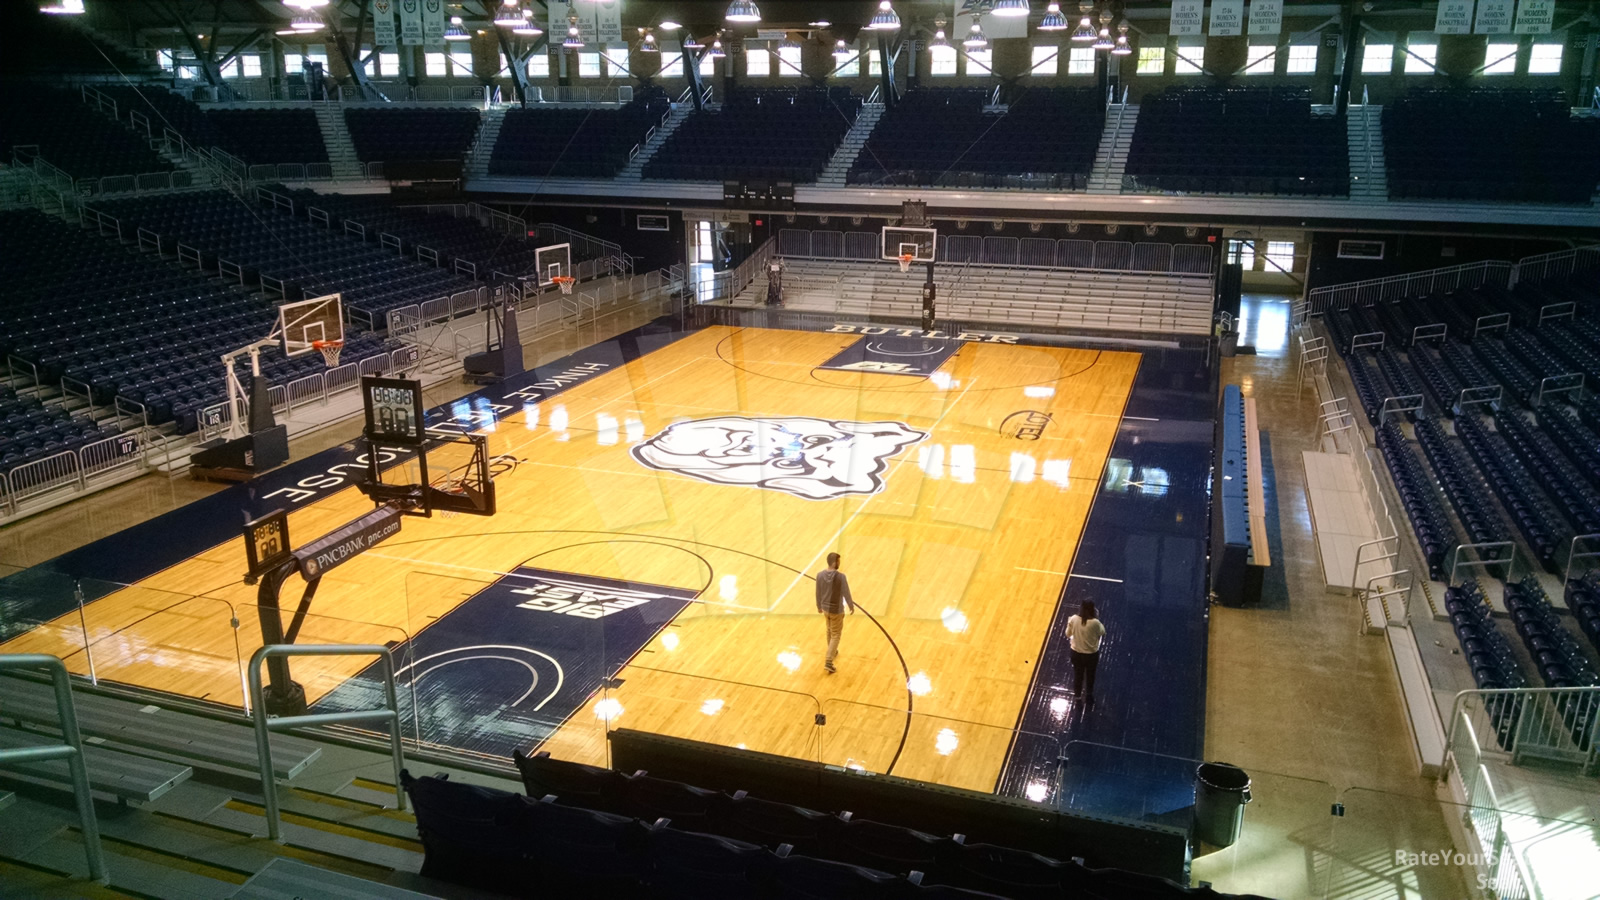 section 211, row 7 seat view  - hinkle fieldhouse